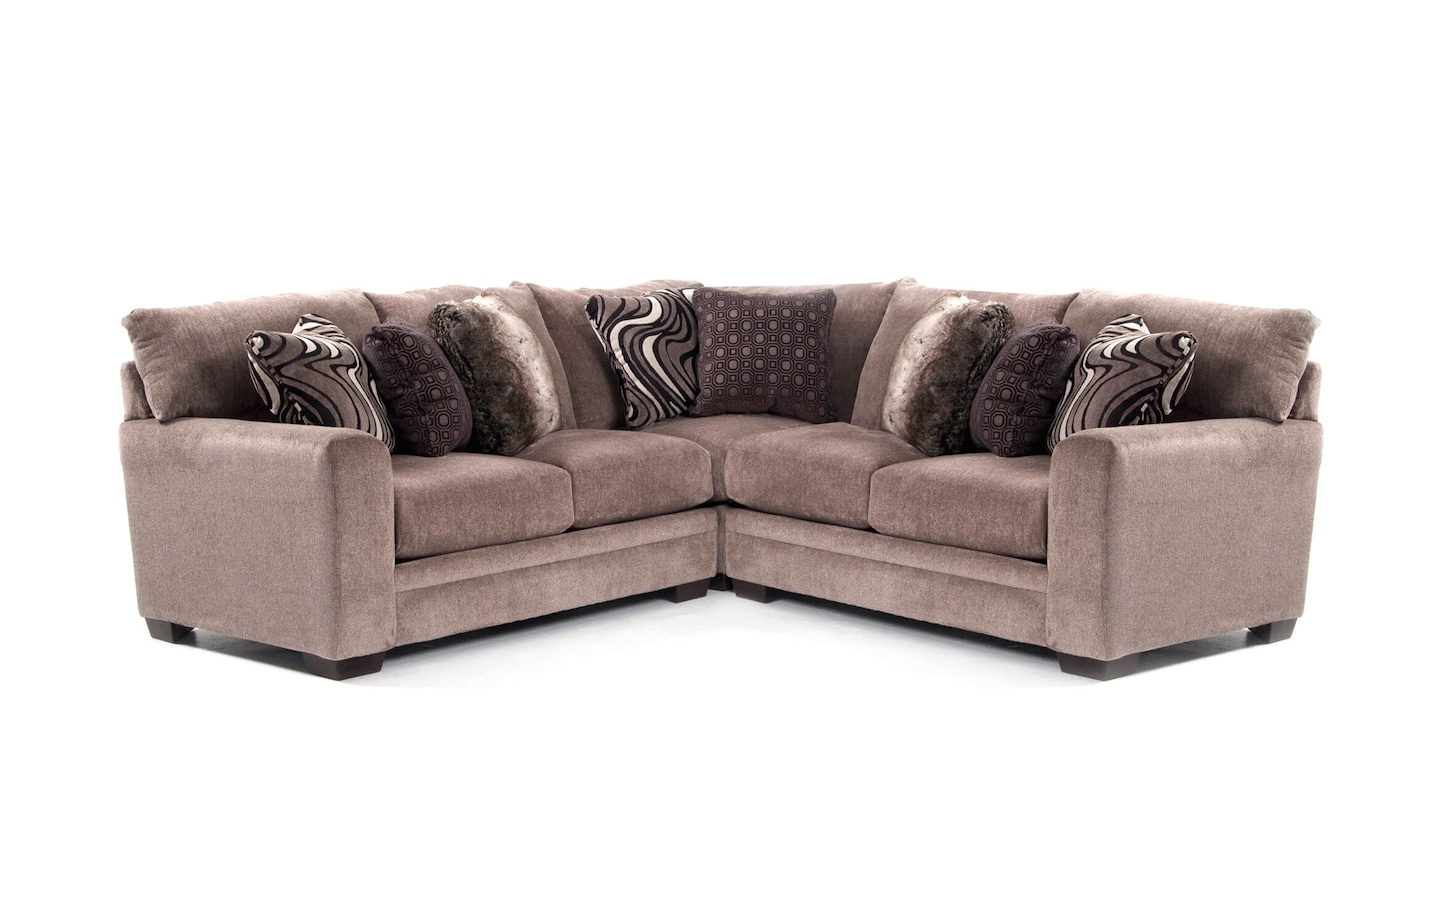 BOB'S DISCOUNT FURNITURE SHOP WITH ME LIVING ROOM SETS SOFAS